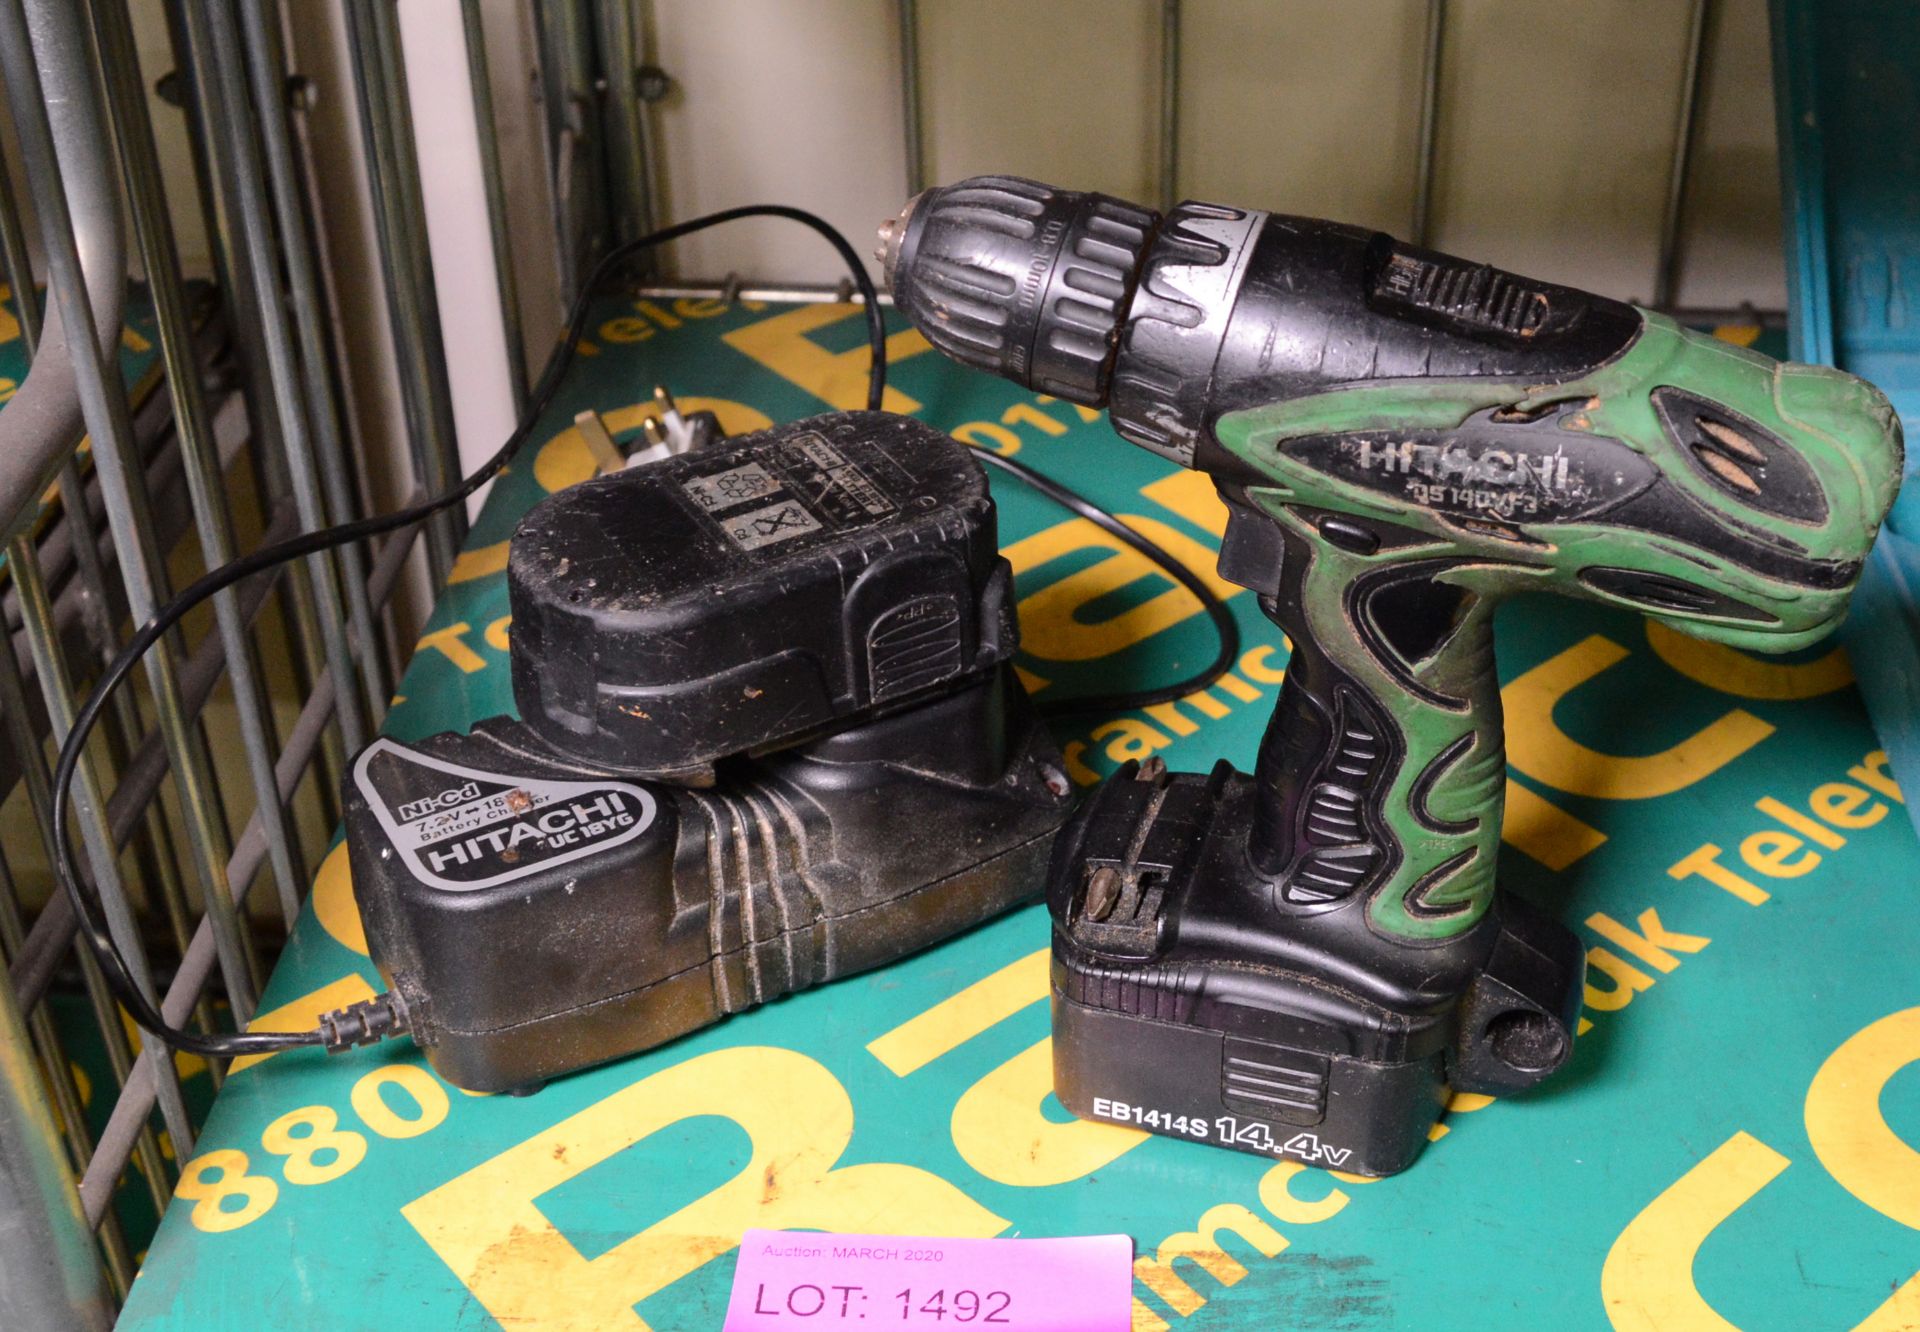 Hitachi DS14DVF3 14.4V Drill, Batteries & Charger.